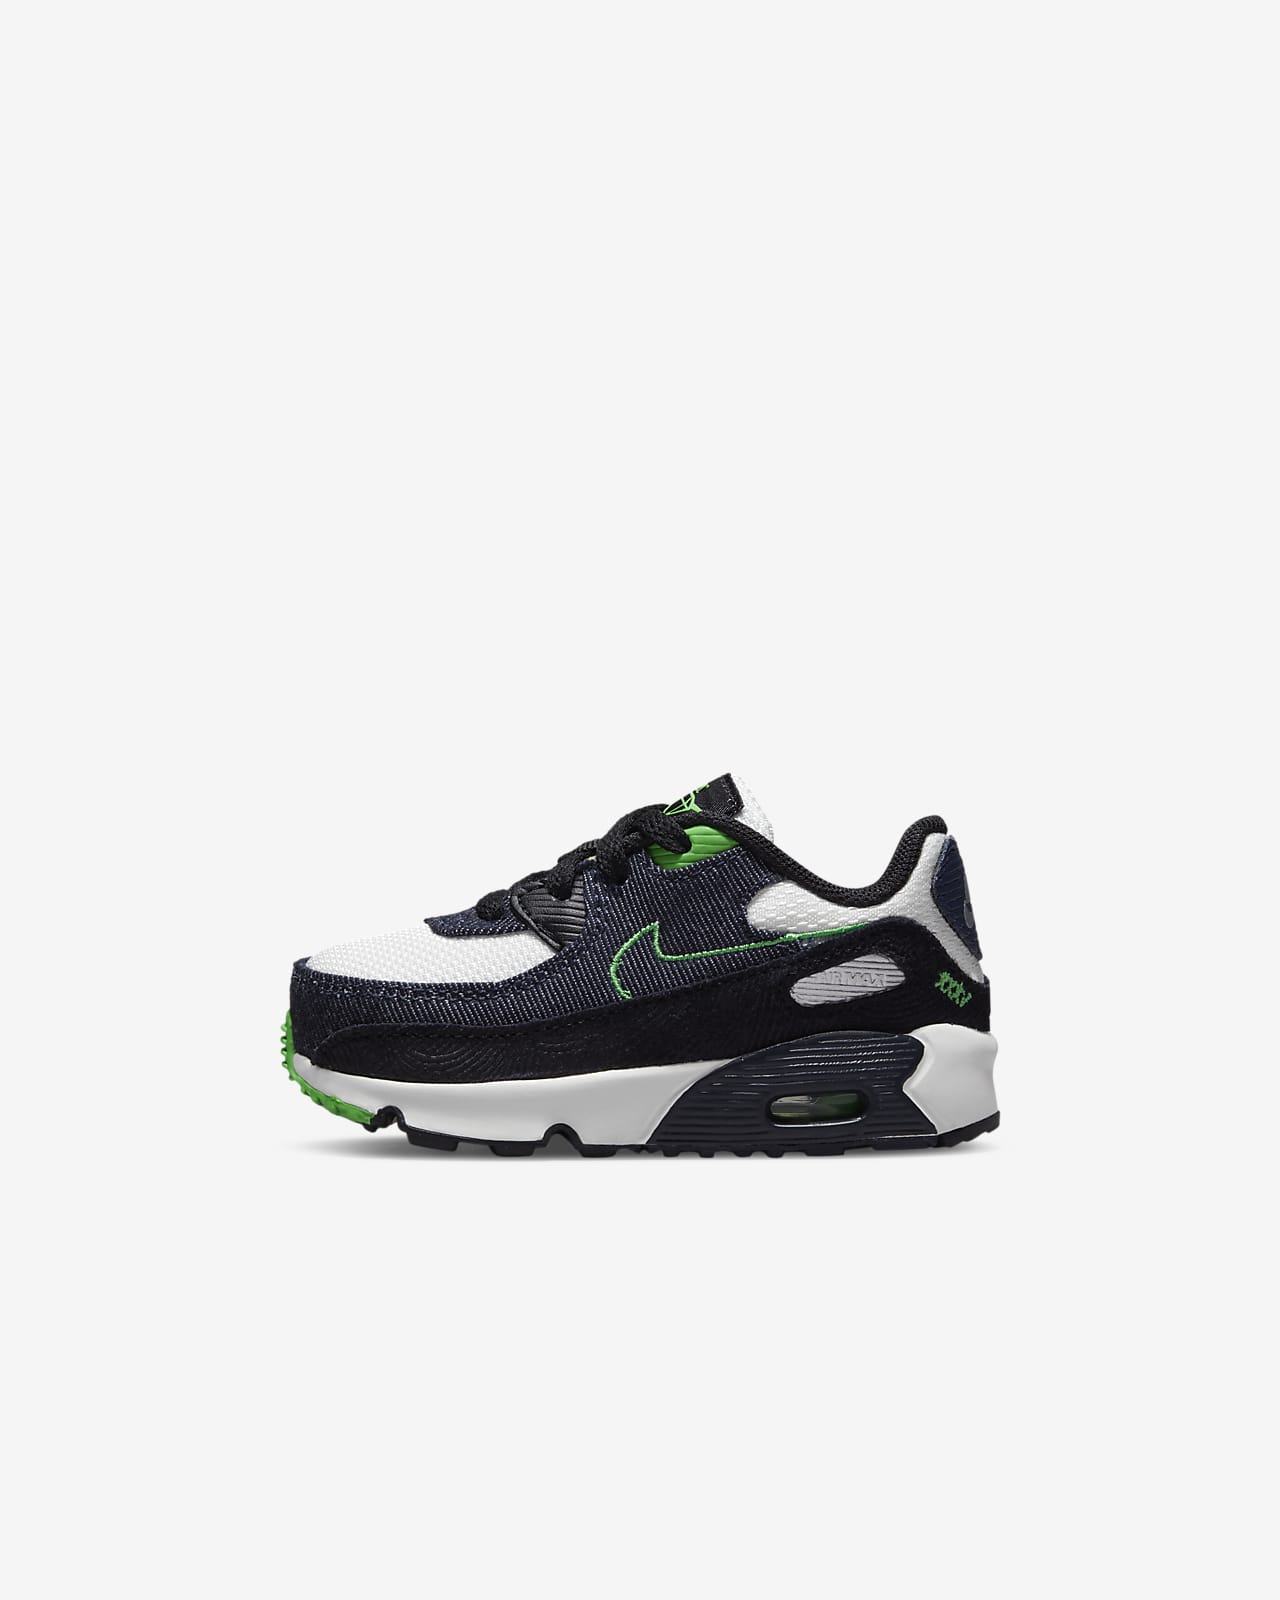 Nike Air Max 90 LTR SE Baby/Toddler Shoes اجسام رشيقه